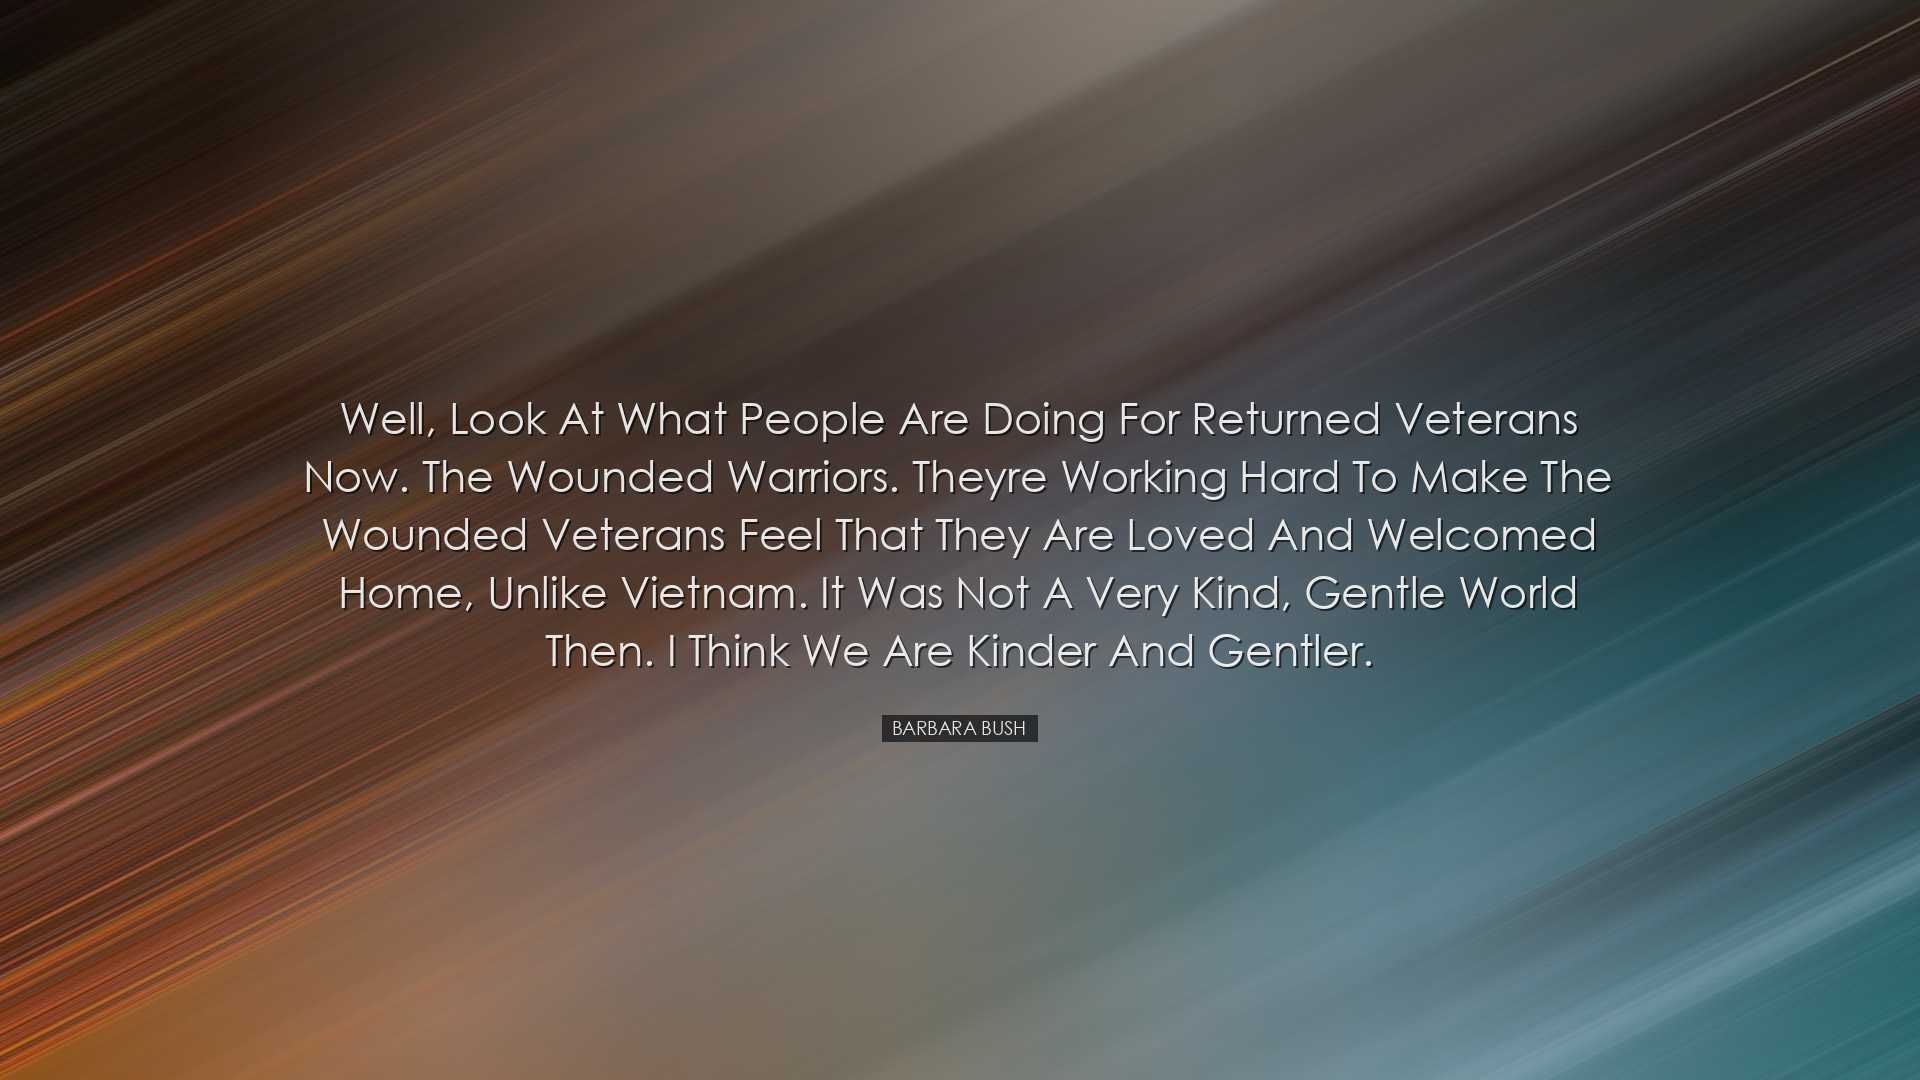 Well, look at what people are doing for returned veterans now. The